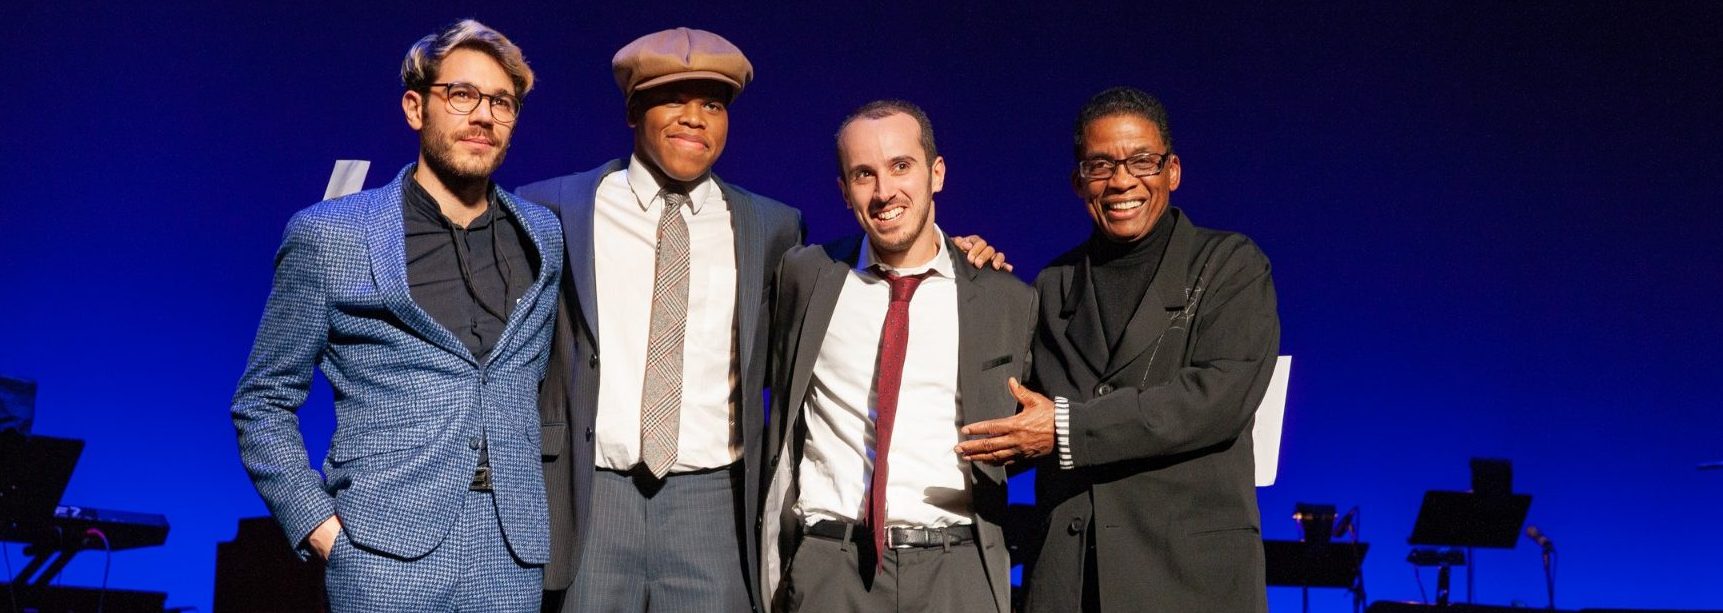 2018 Competition Finalists (from left) Maxime Sanchez, Isaiah Thompson and Tom Oren with Institute Chairman Herbie Hancock at the John F. Kennedy Center for the Performing Arts, December 3, 2018.